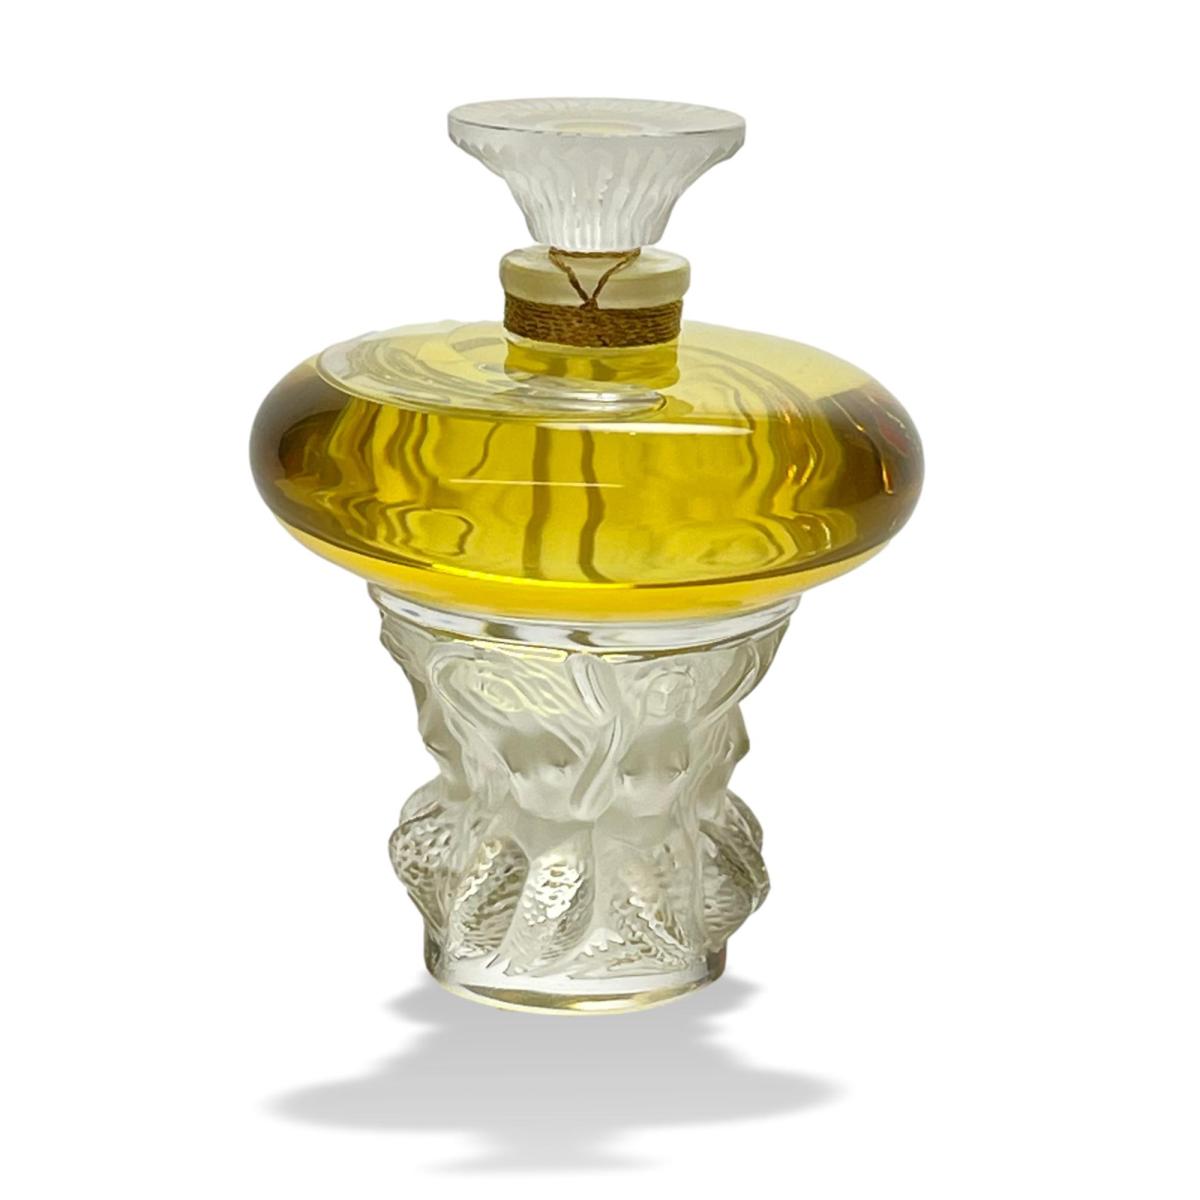 Limited Edition Perfume Bottle entitled  "Les Sirens" by Marie Claude Lalique